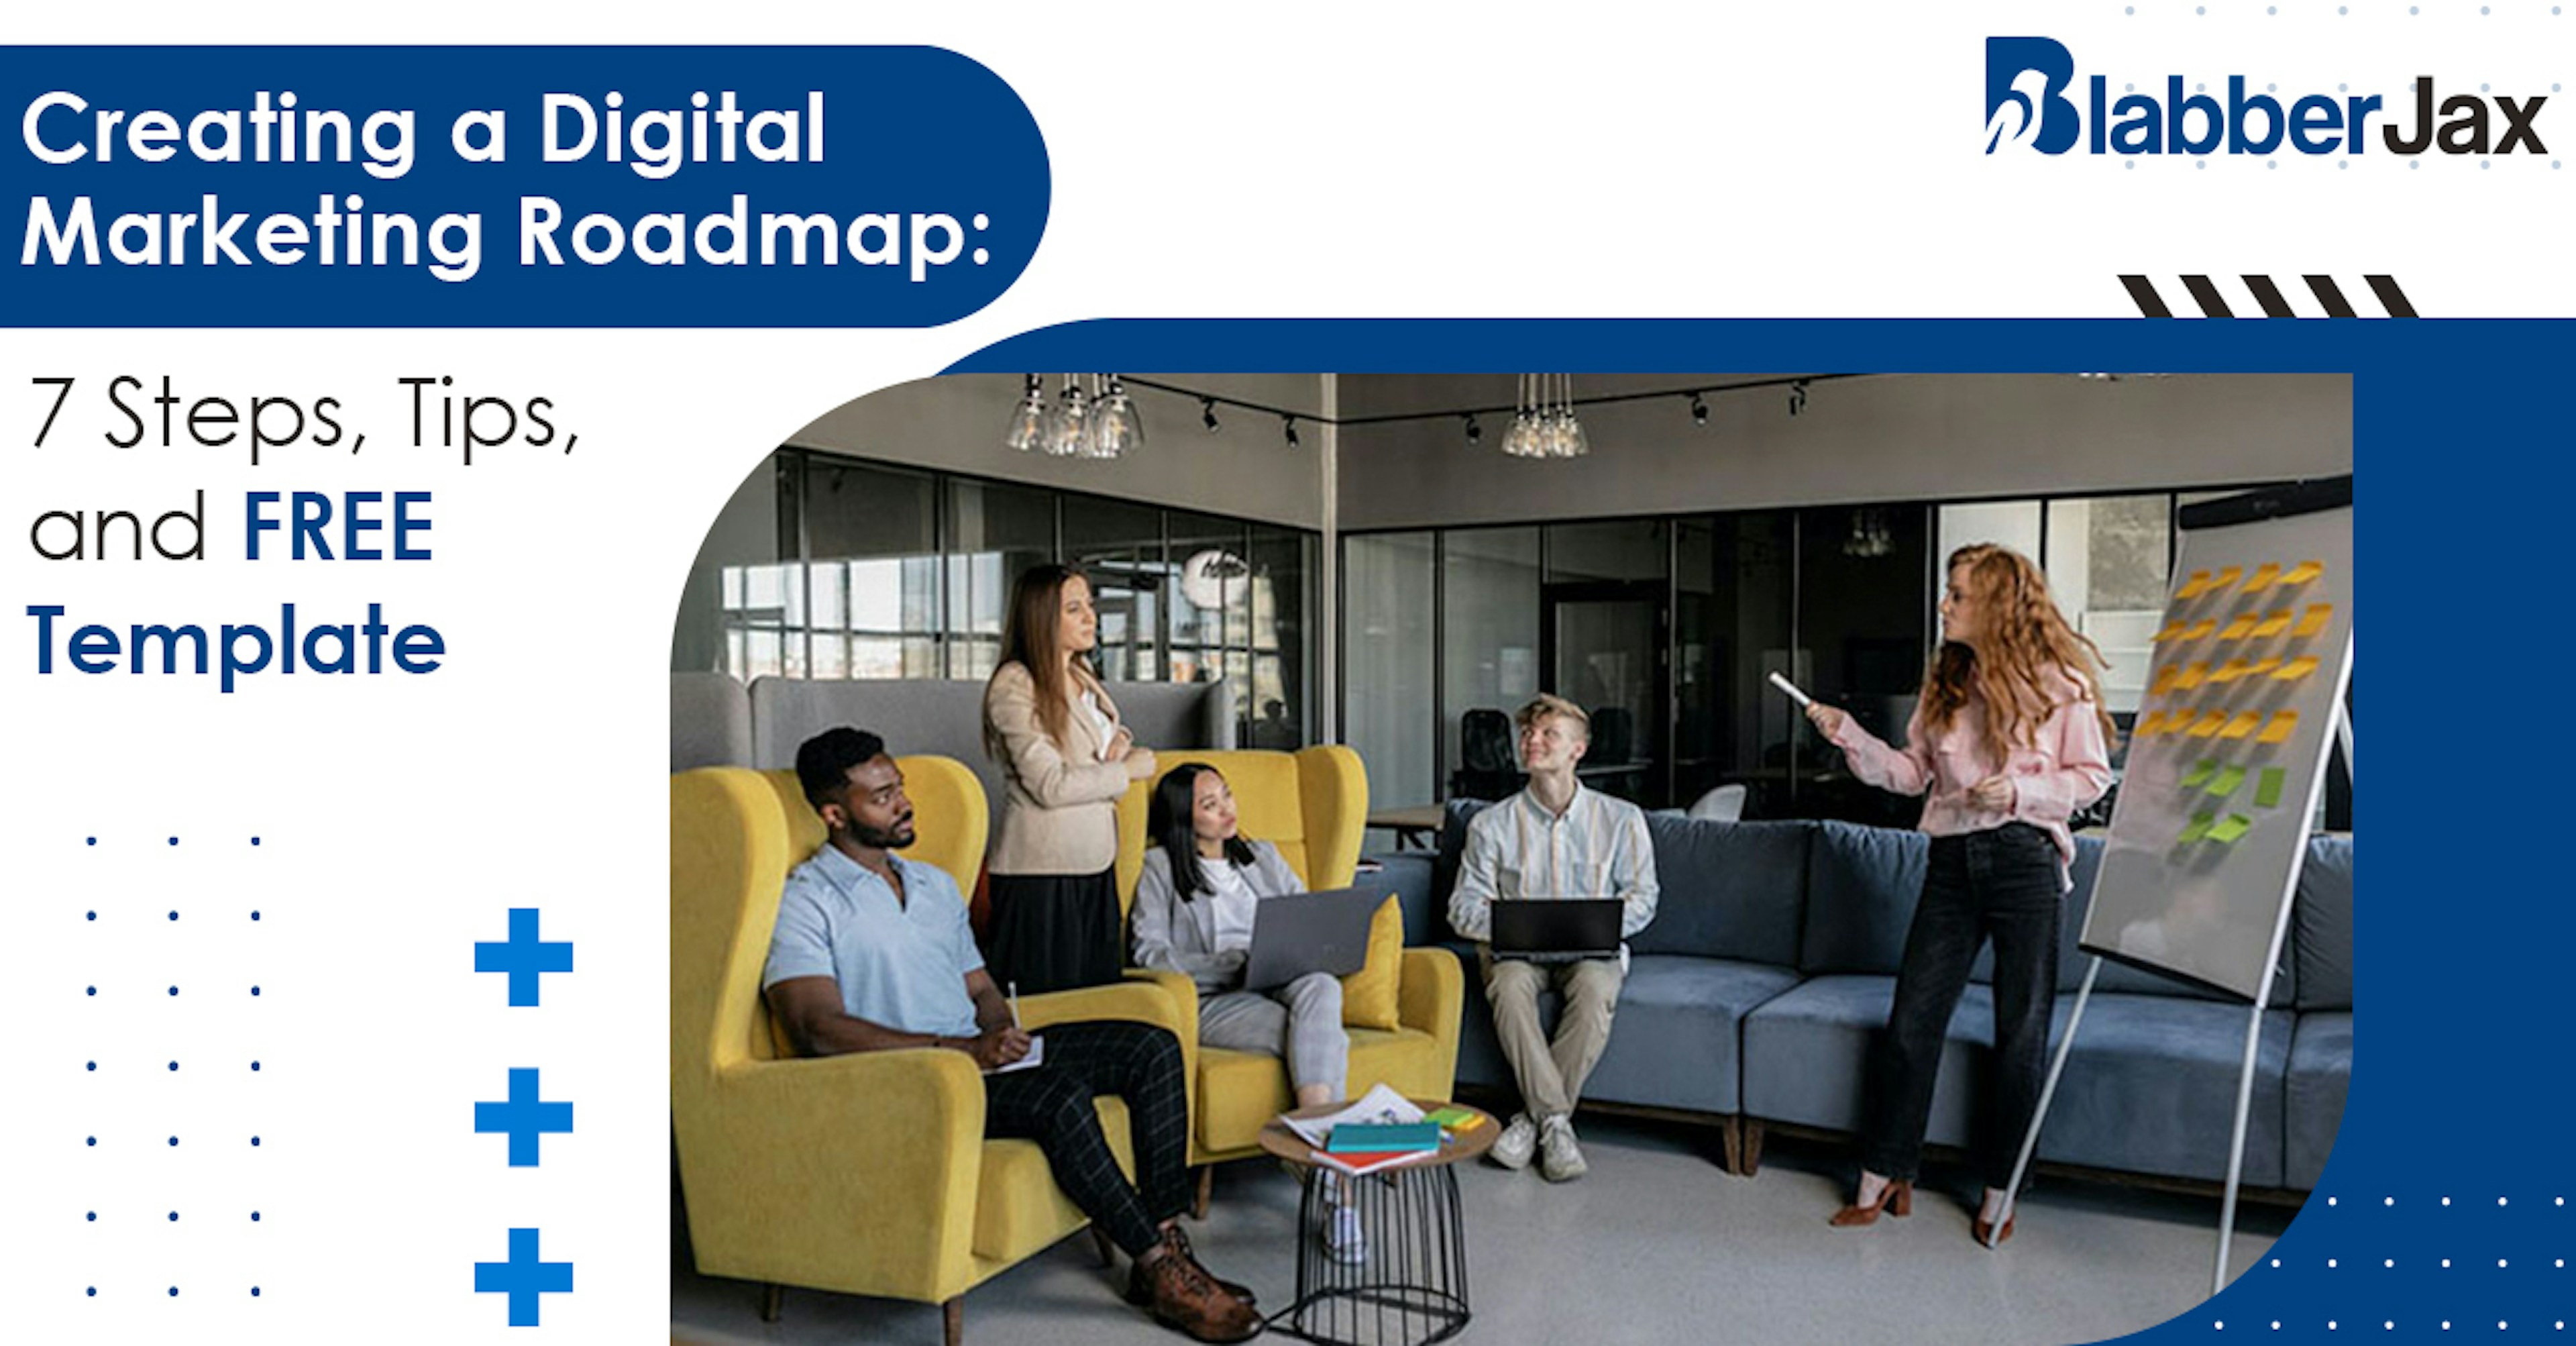 Creating a Digital Marketing Roadmap: 7 Steps, Tips, and FREE Template